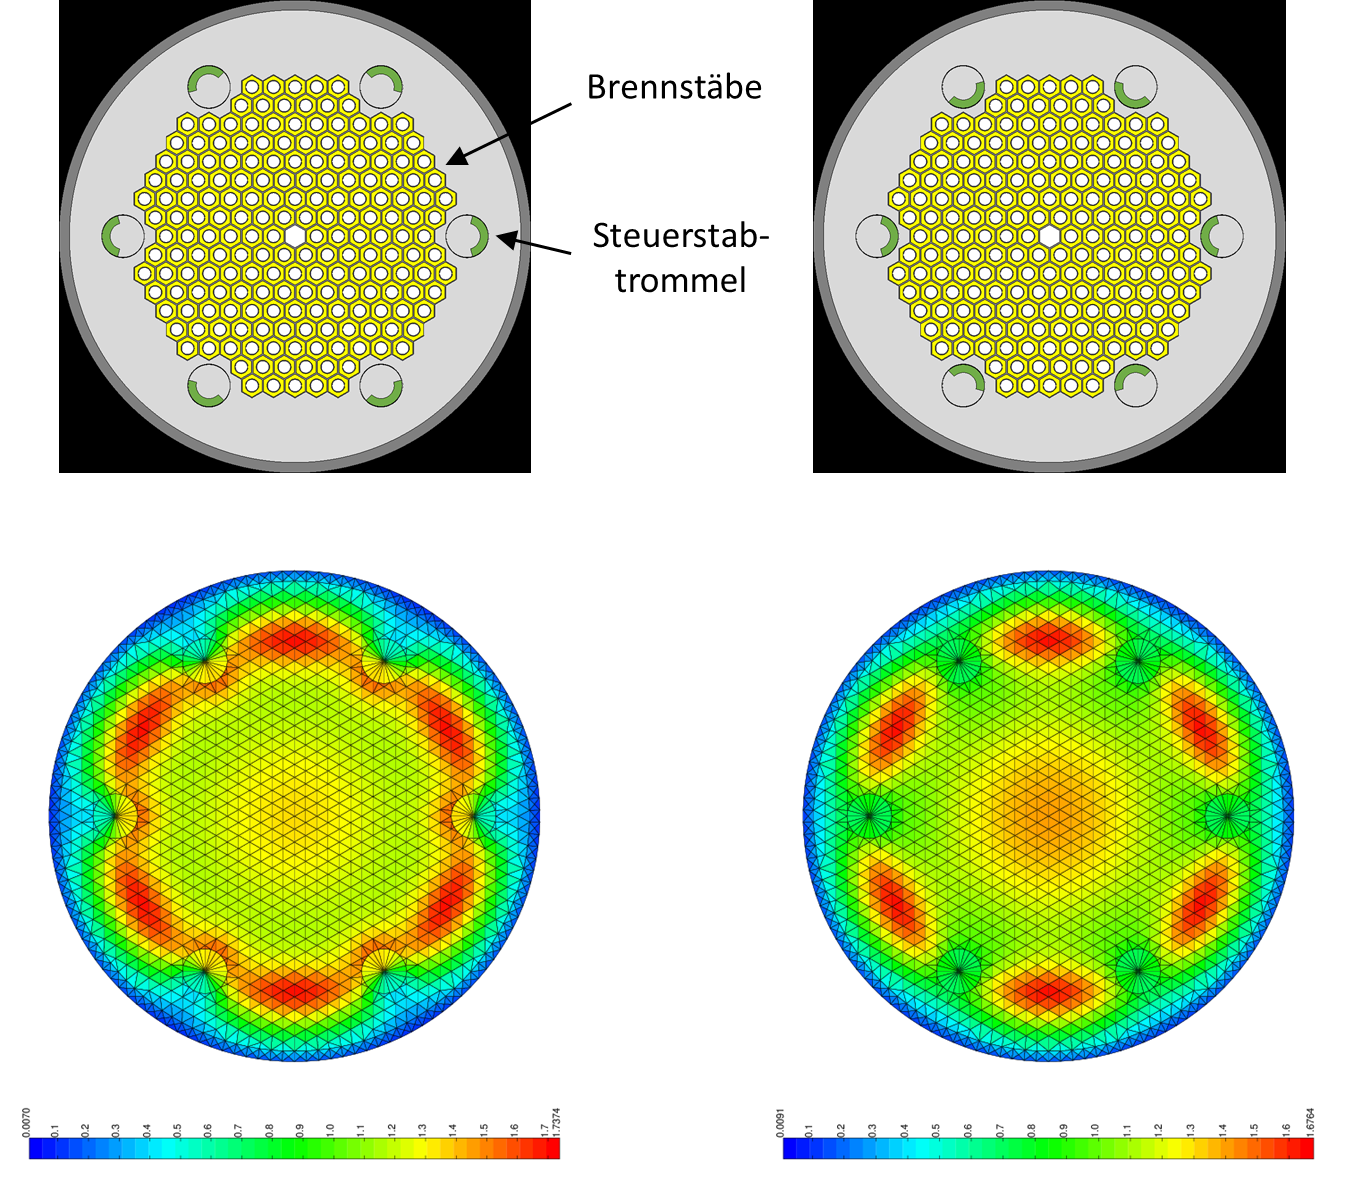 Top row: Radial section through the core of a microreactor with control rod drums turned out (left) and turned in (right), Bottom row: Associated neutron flux distributions calculated with FENNECS (red: high flux, blue: low flux)